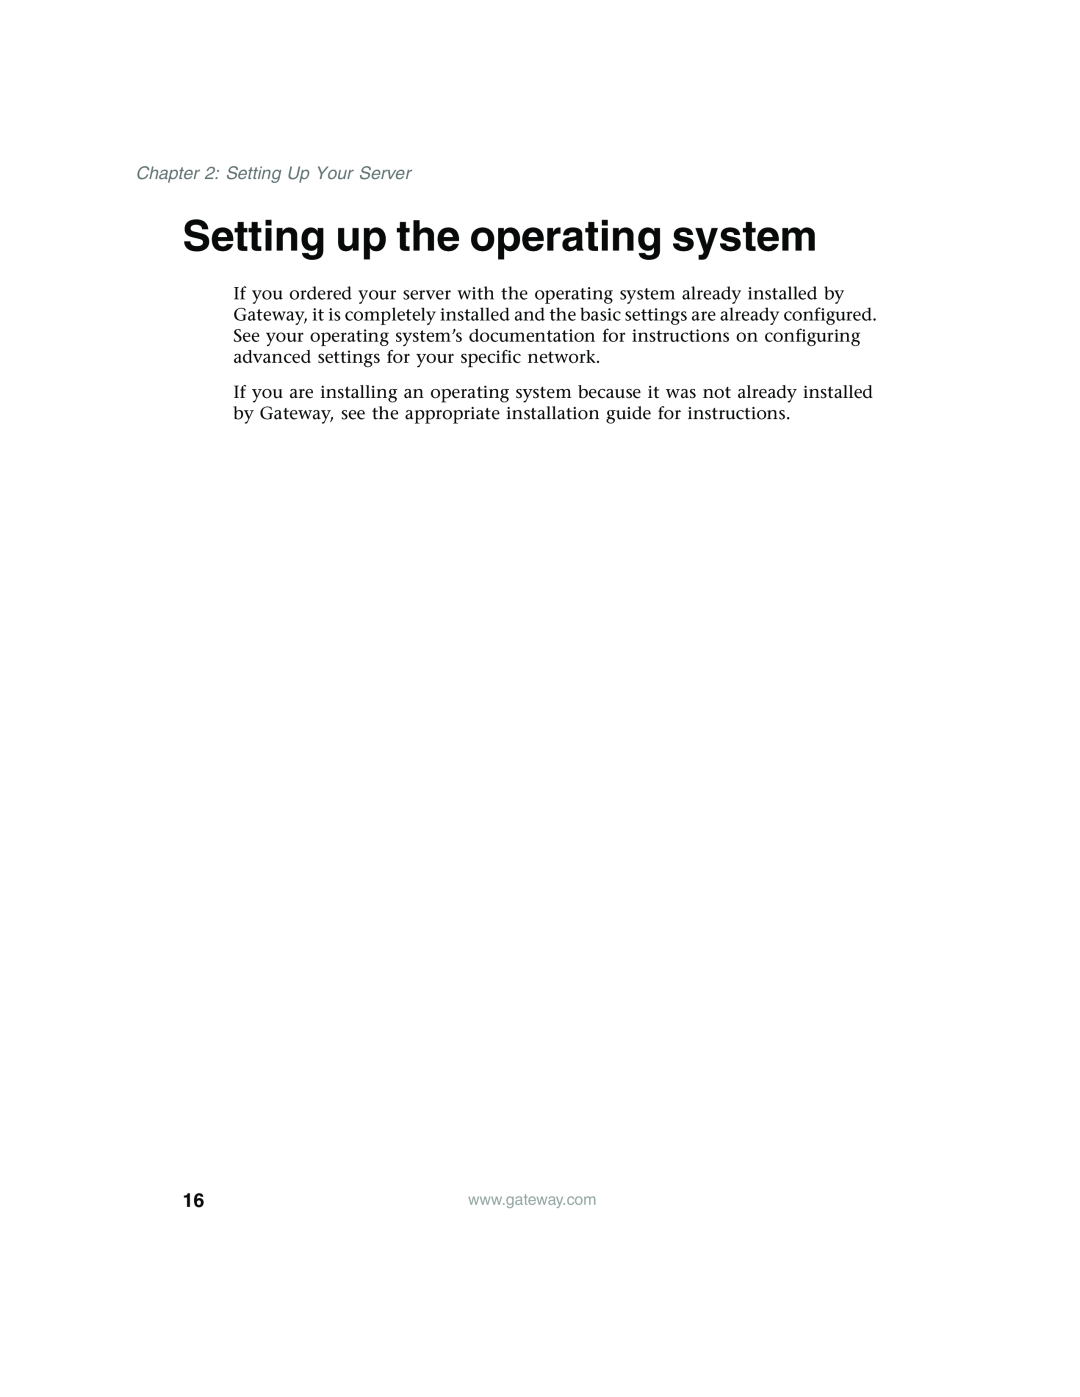 Gateway 980 manual Setting up the operating system, Setting Up Your Server 